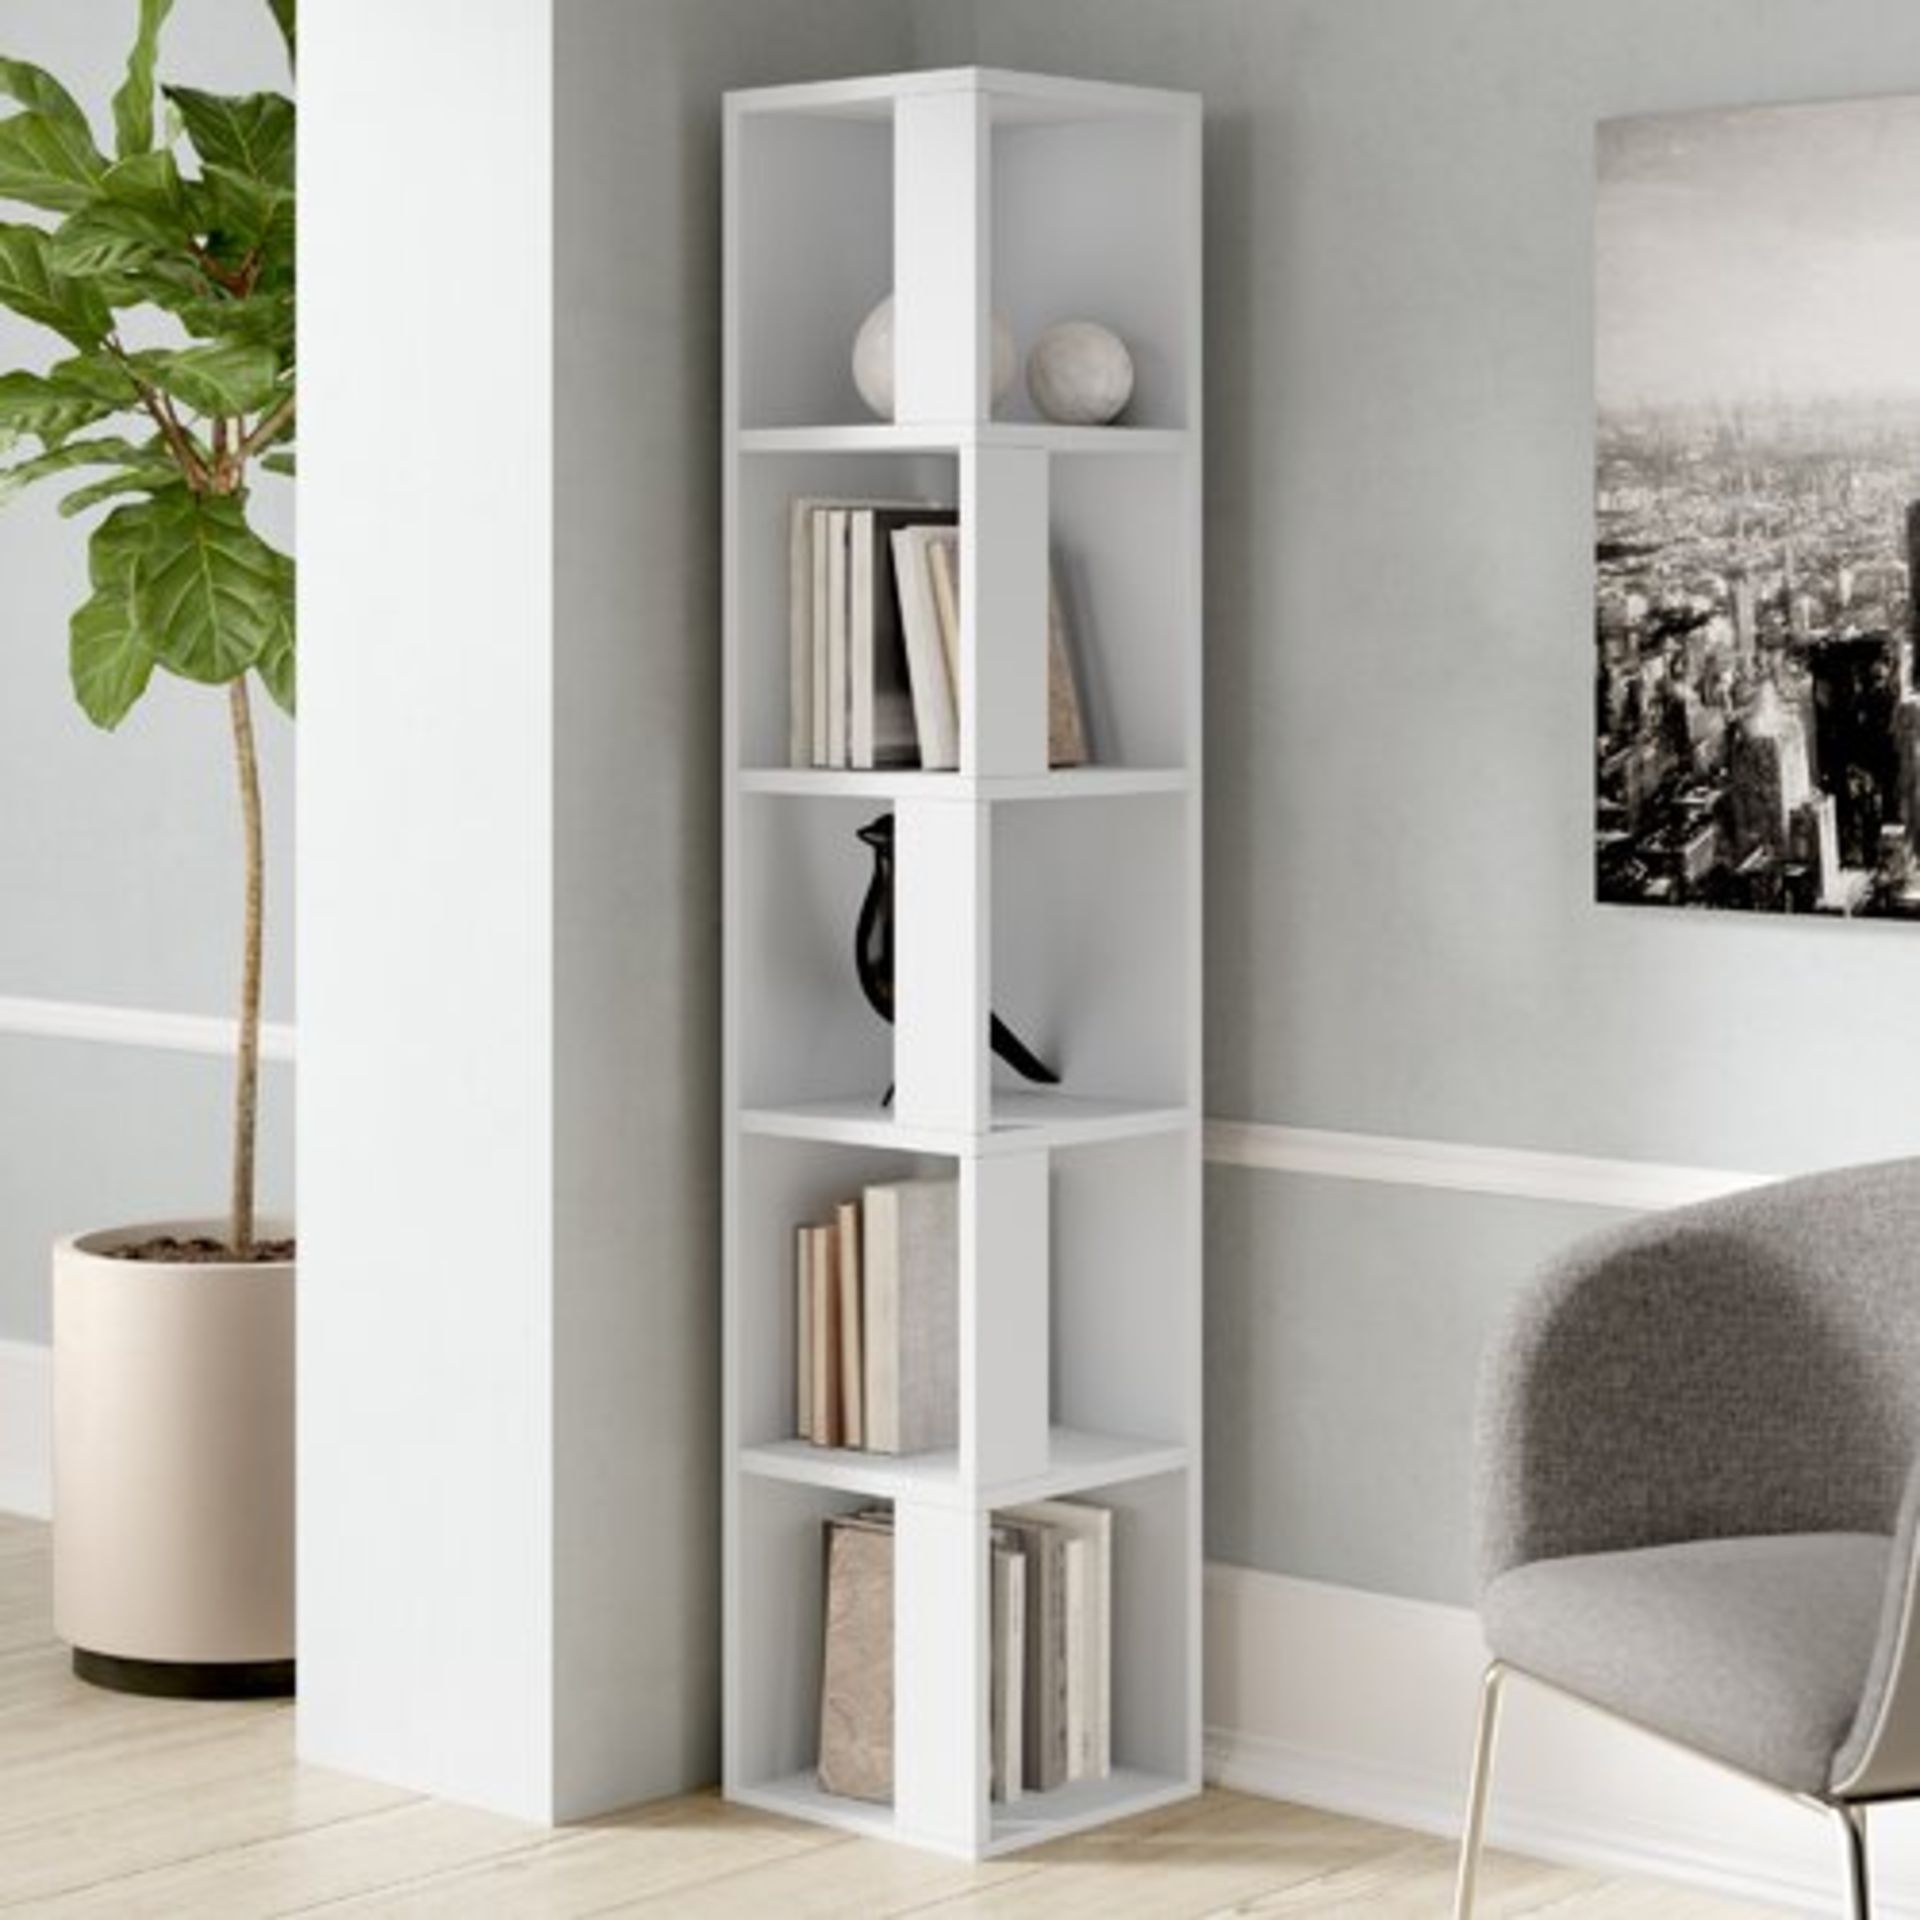 BENSONHURTS CORNER BOOKCASE IN WHITE RRP £89.99Condition ReportAppraisal Available on Request- All